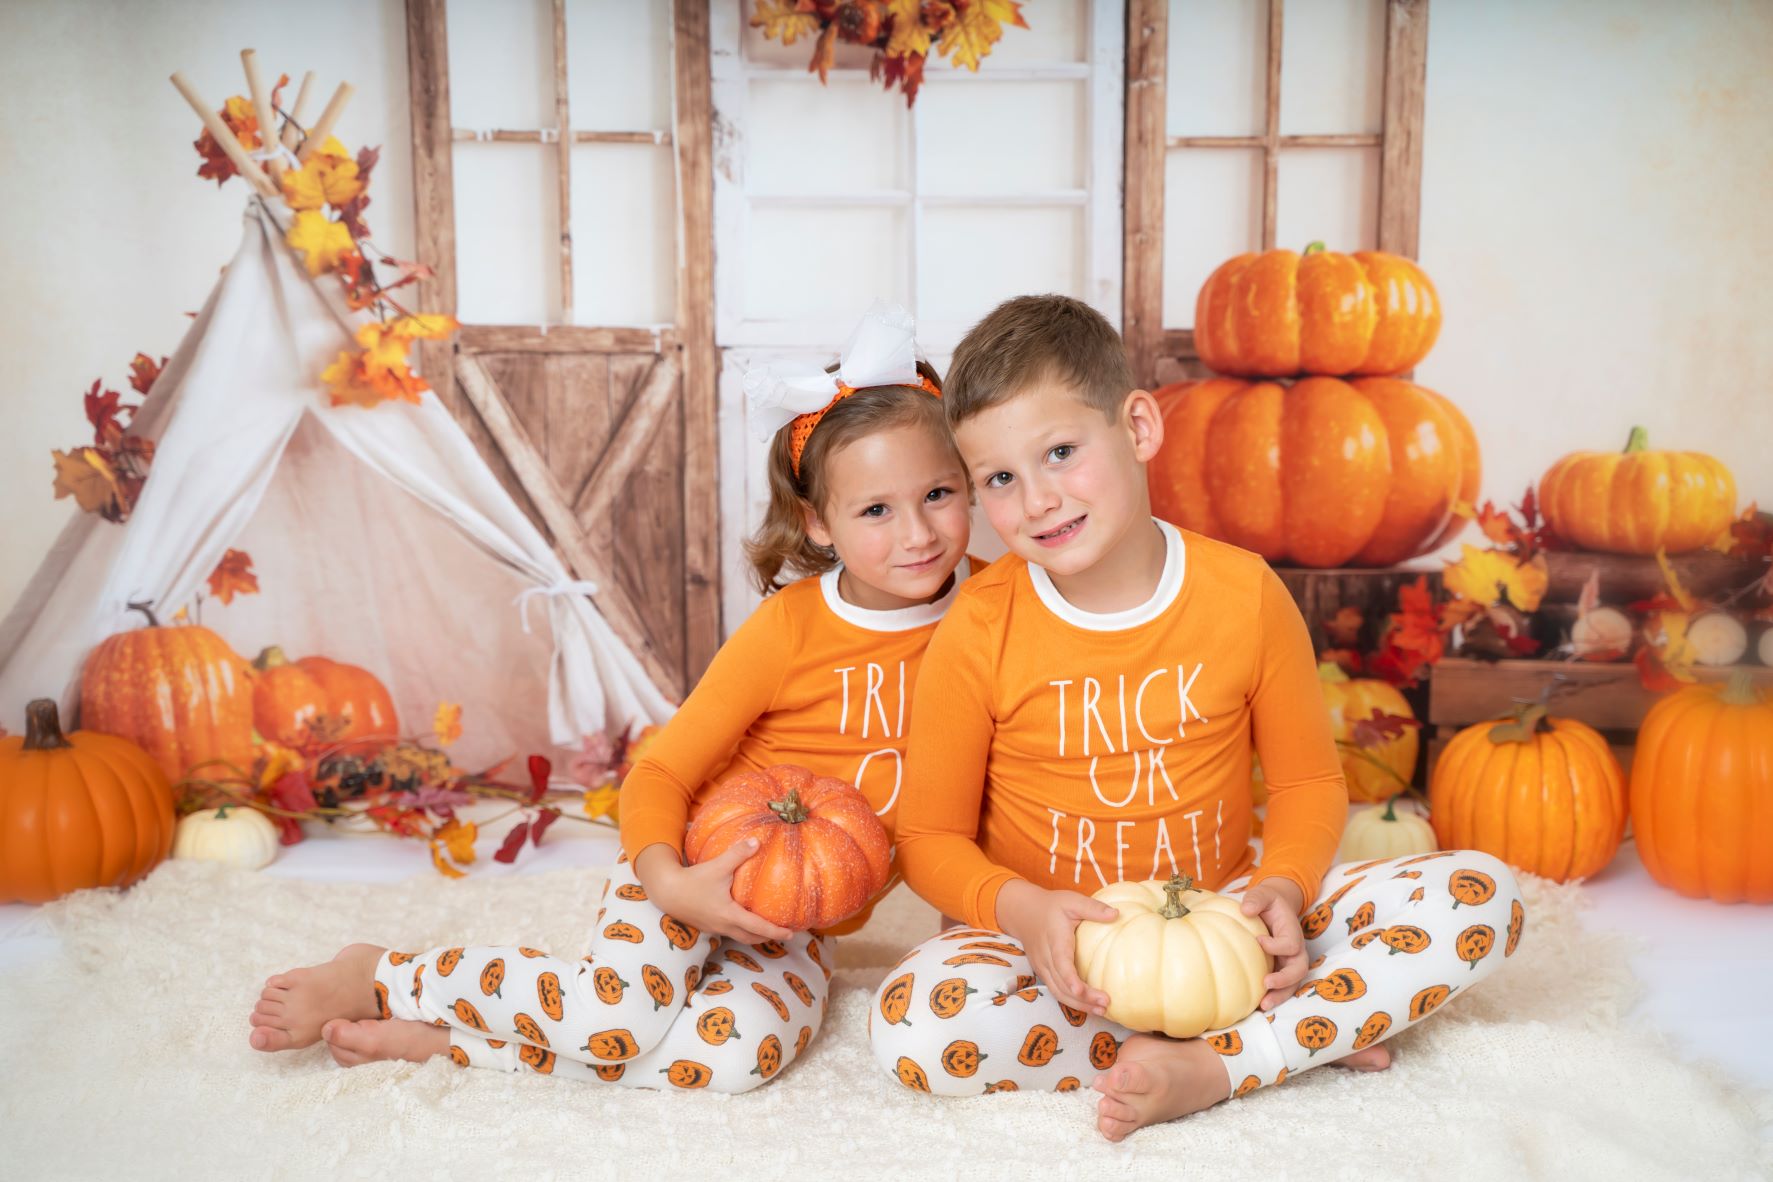 Kate Fall Harvest Backdrop Pumpkin White Tent for Photography